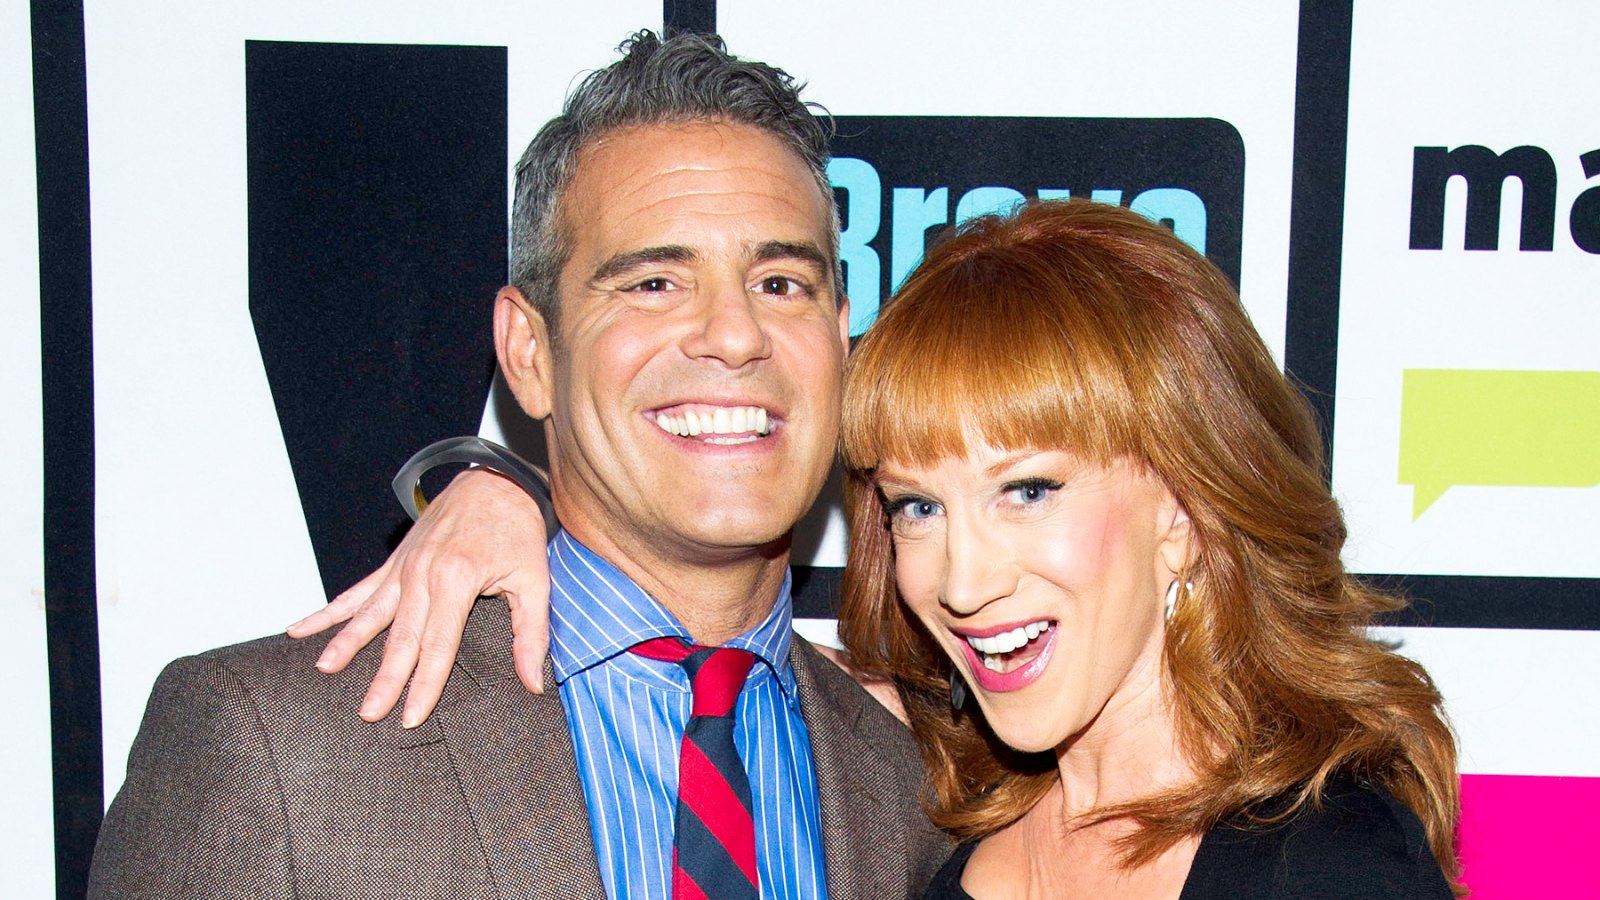 Andy Cohen and Kathy Griffin feud